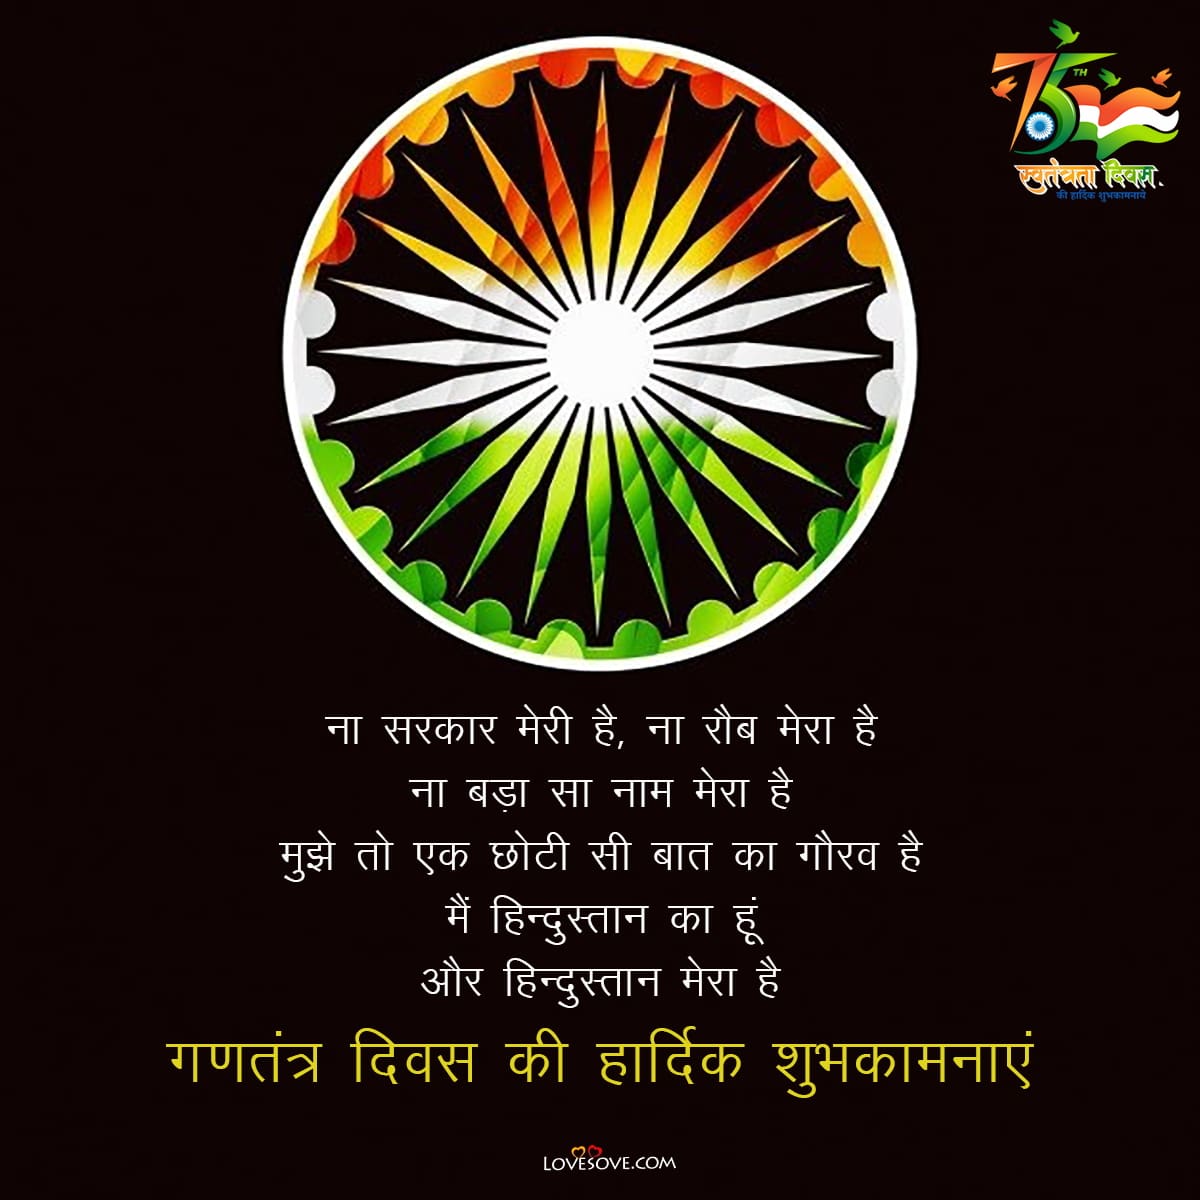 Happy Republic Day Wishes In Hindi, 26th January Wishes